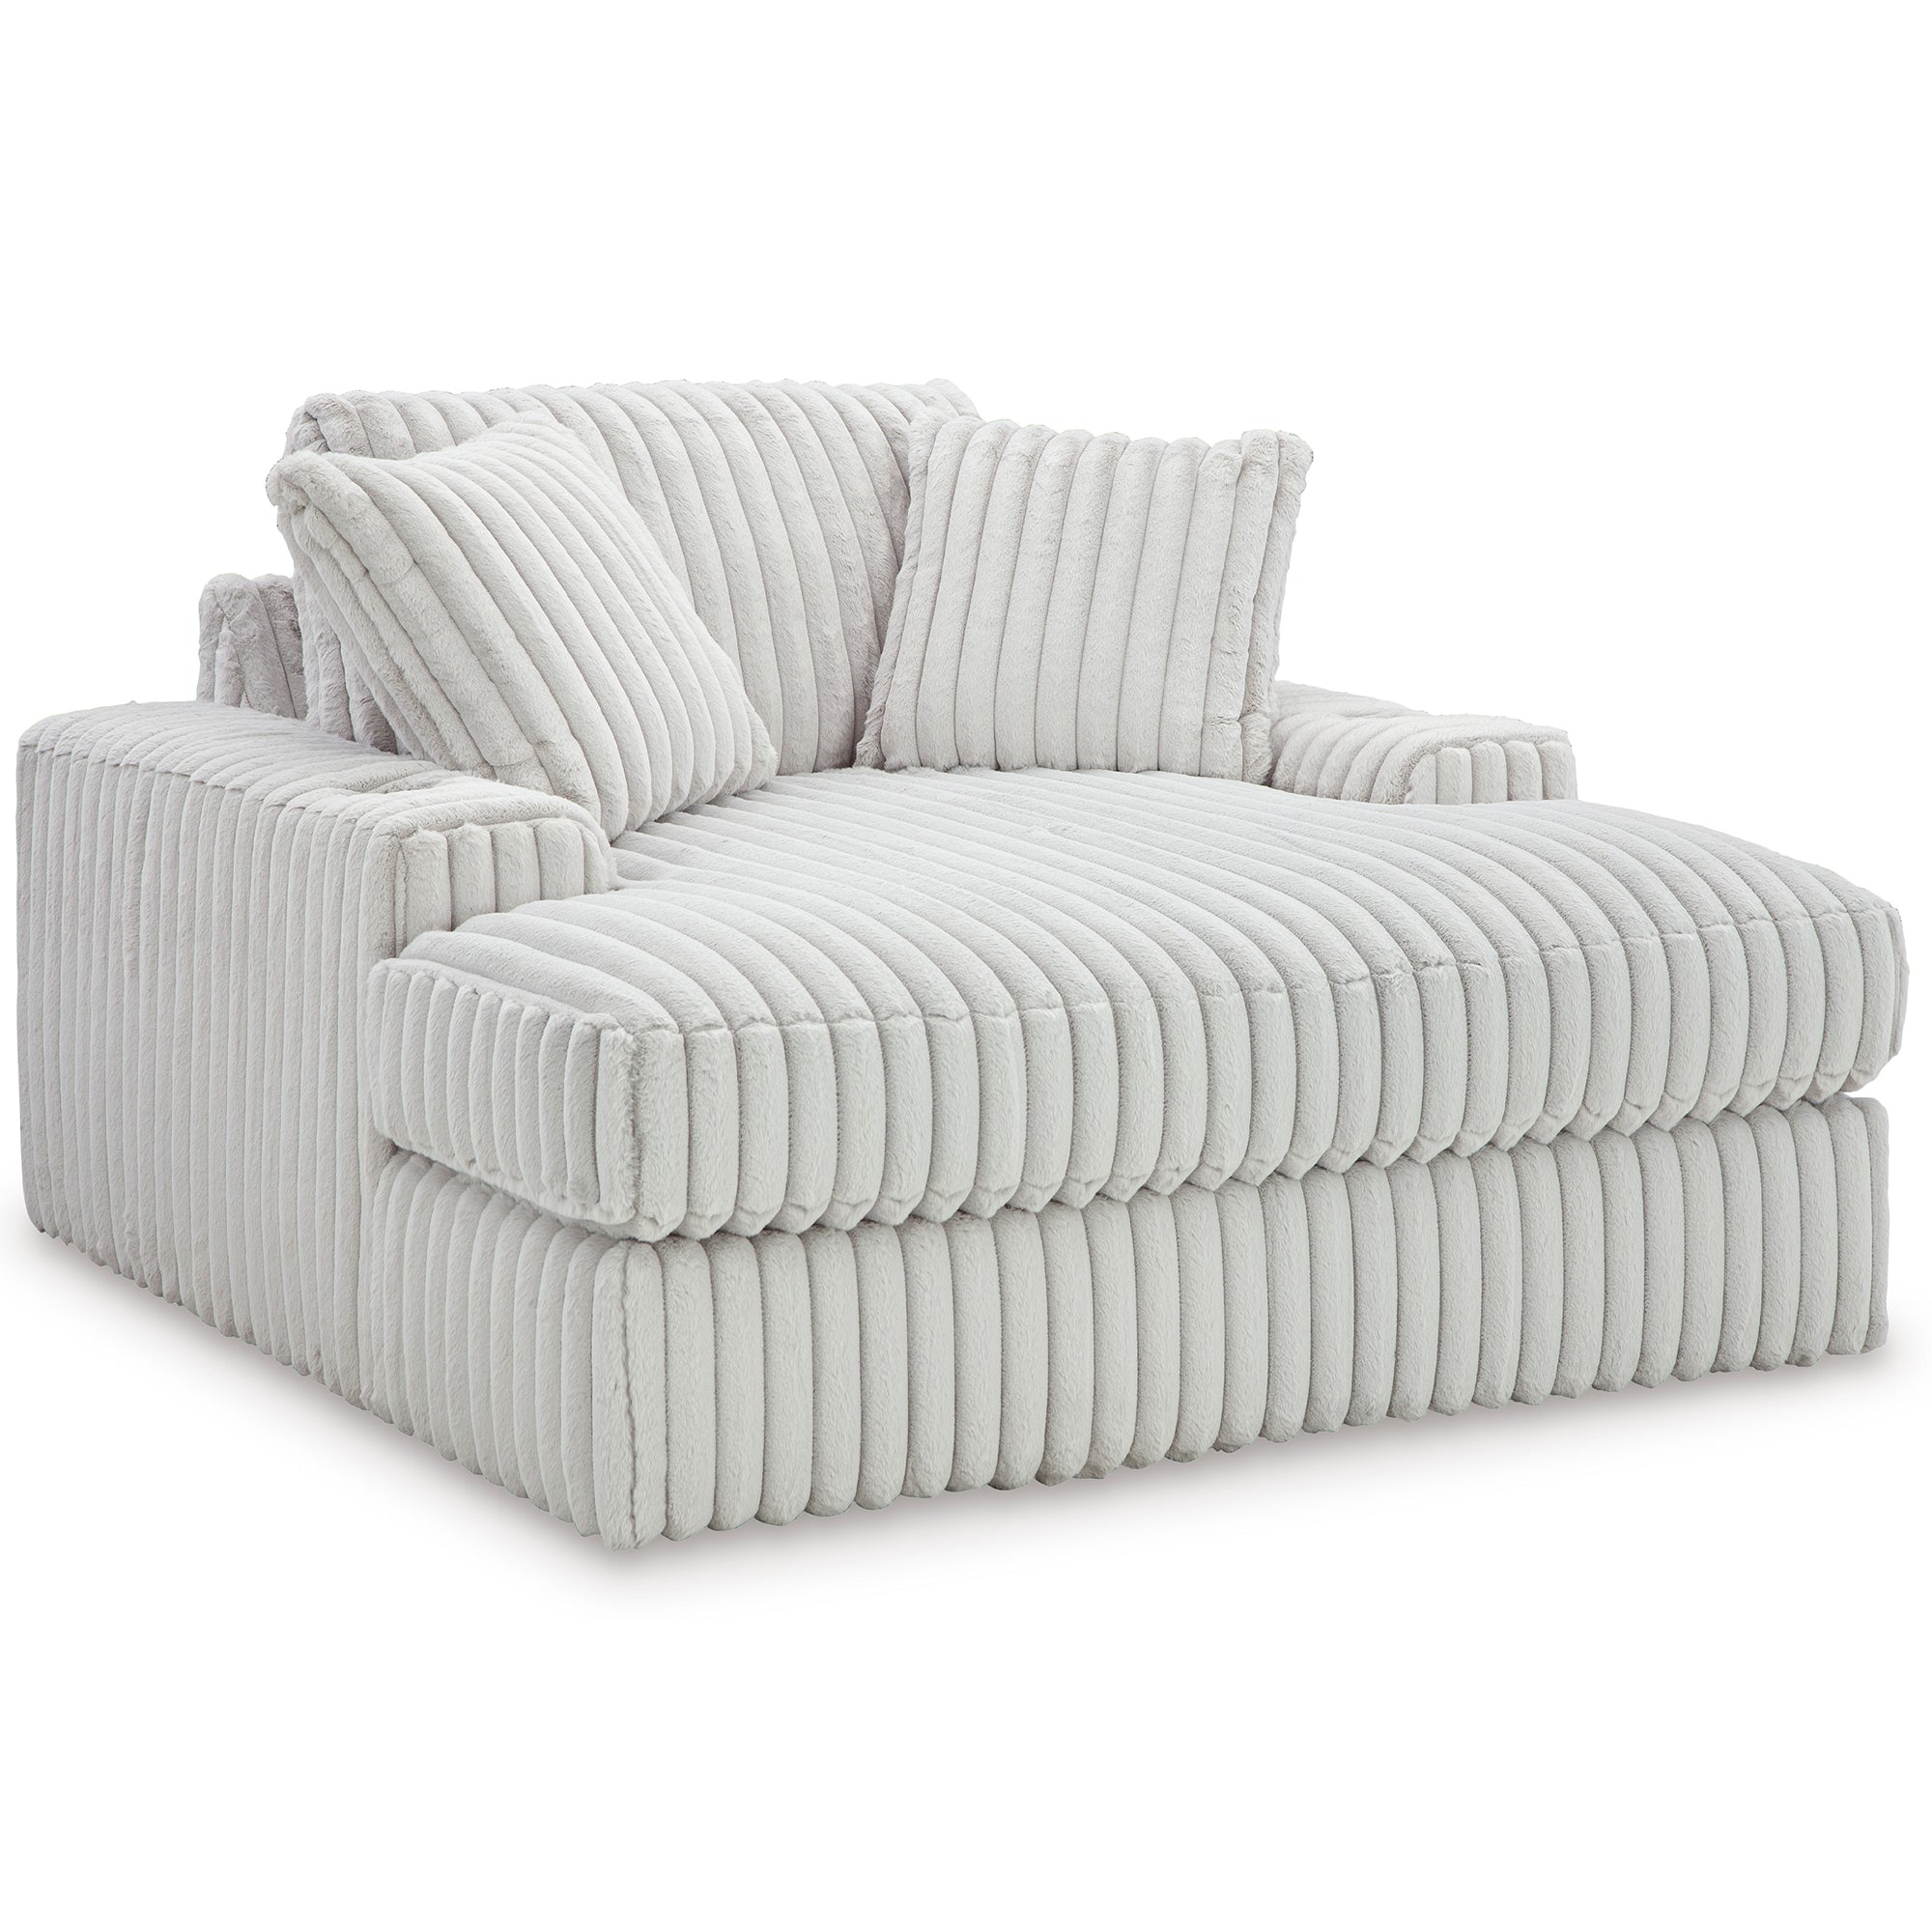 Stupendous Oversized Chaise with retro jumbo cord and feather-blend cushions for luxurious comfort and standout style